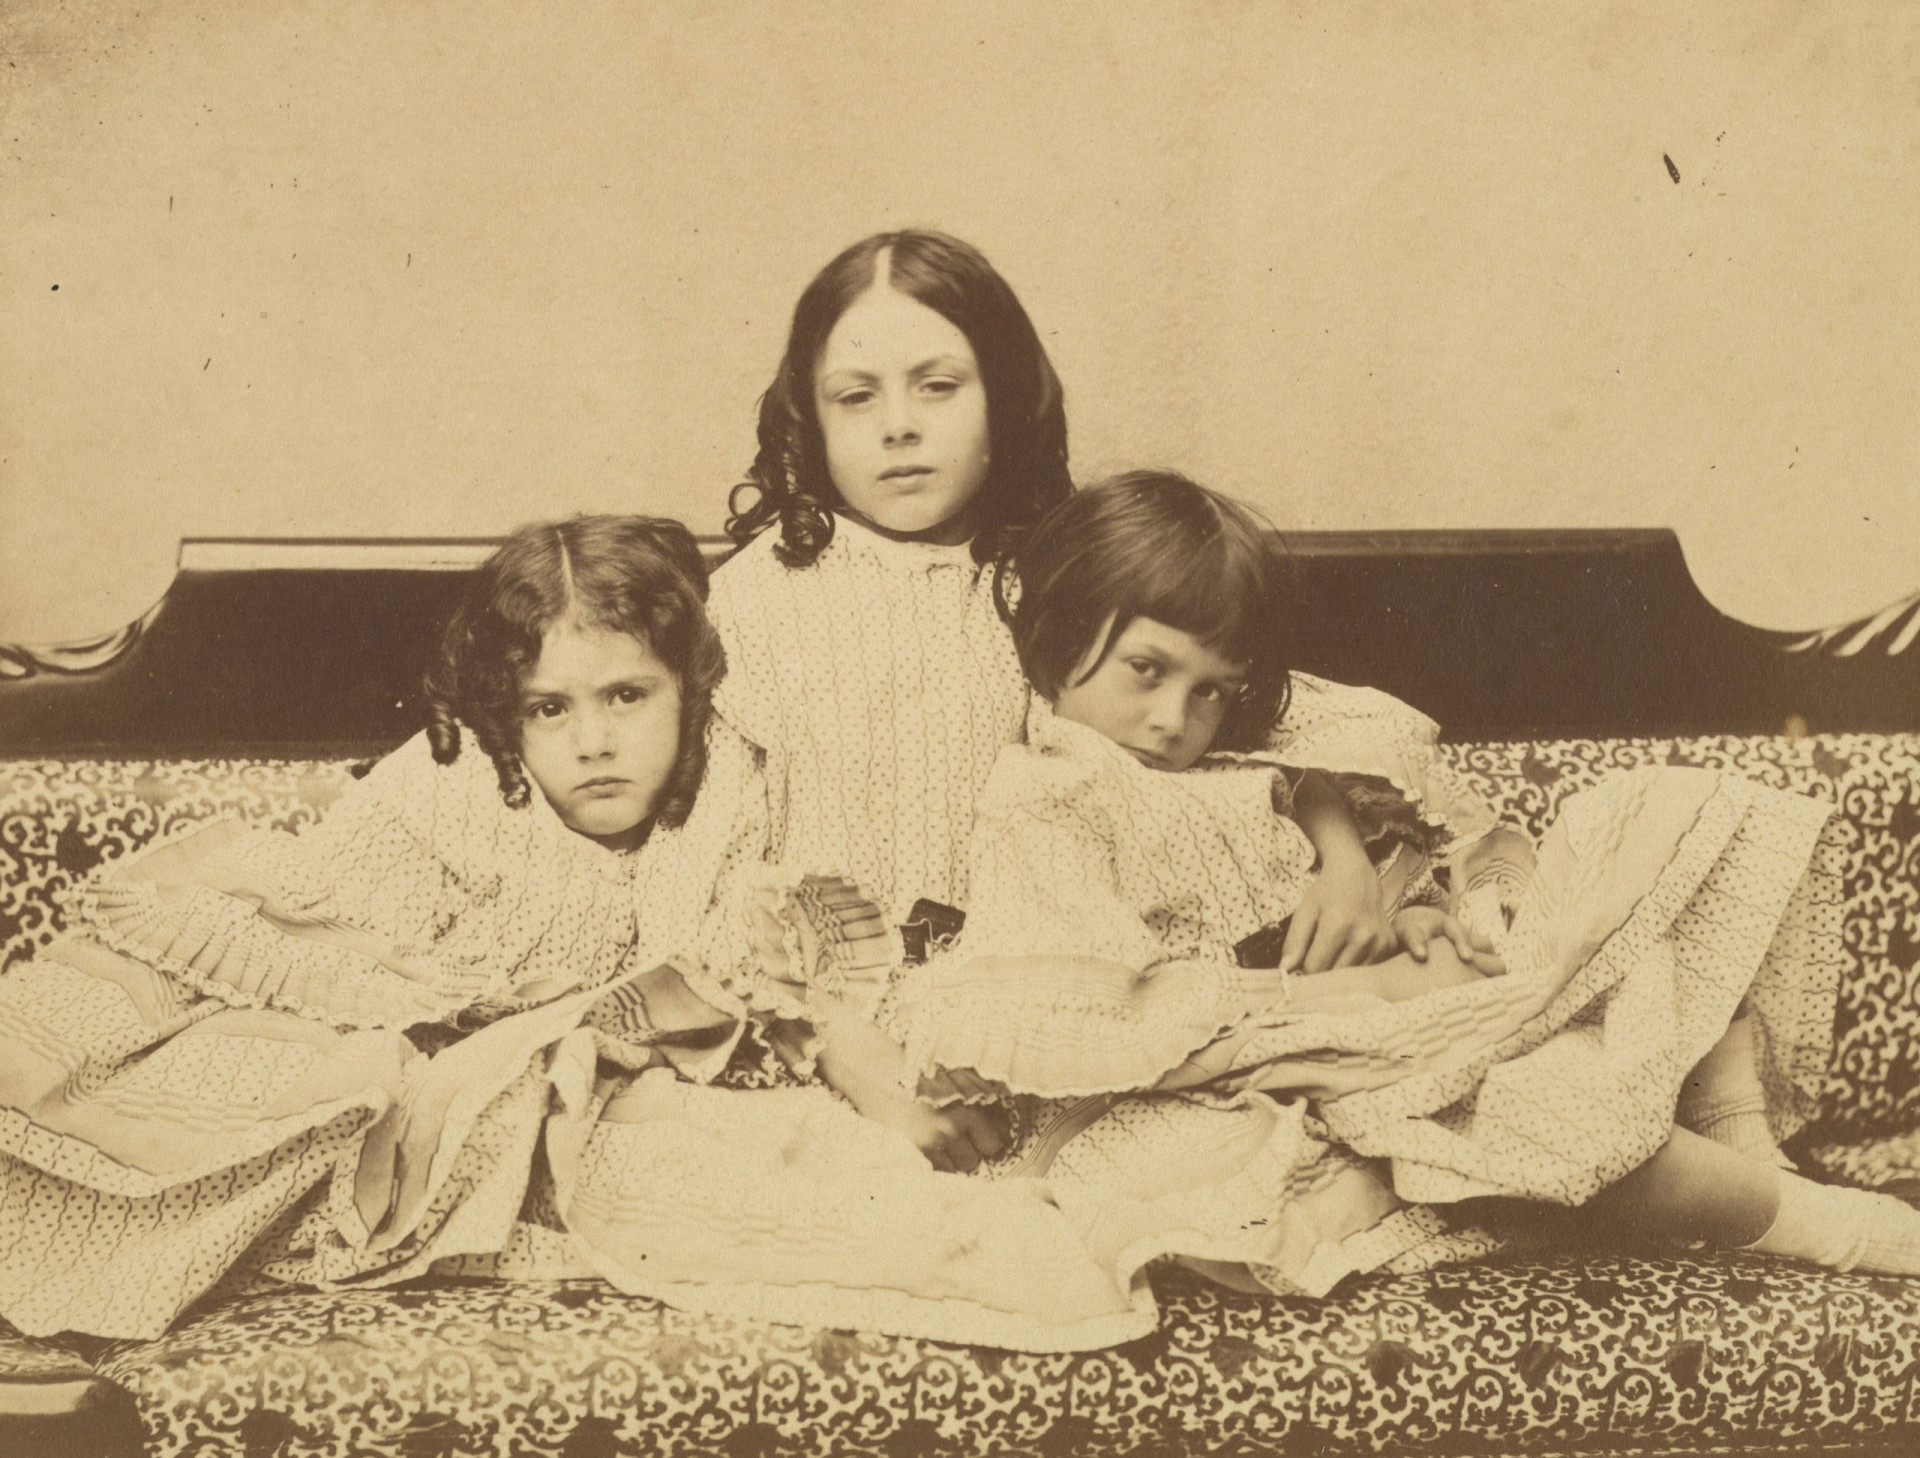 <p>The relationship between Liddell and Dodgson has been the source of much controversy. A keen amateur photographer, Dodgson photographed many young children, though always in the presence of their parents. While rumors still abound as to the exact nature of their friendship, no proof of impropriety on the part of Dodgson against the youngster has ever been offered.</p><p>You may also like:<a href="https://www.starsinsider.com/n/134894?utm_source=msn.com&utm_medium=display&utm_campaign=referral_description&utm_content=558001en-en"> Meet the most beautiful royal women</a></p>